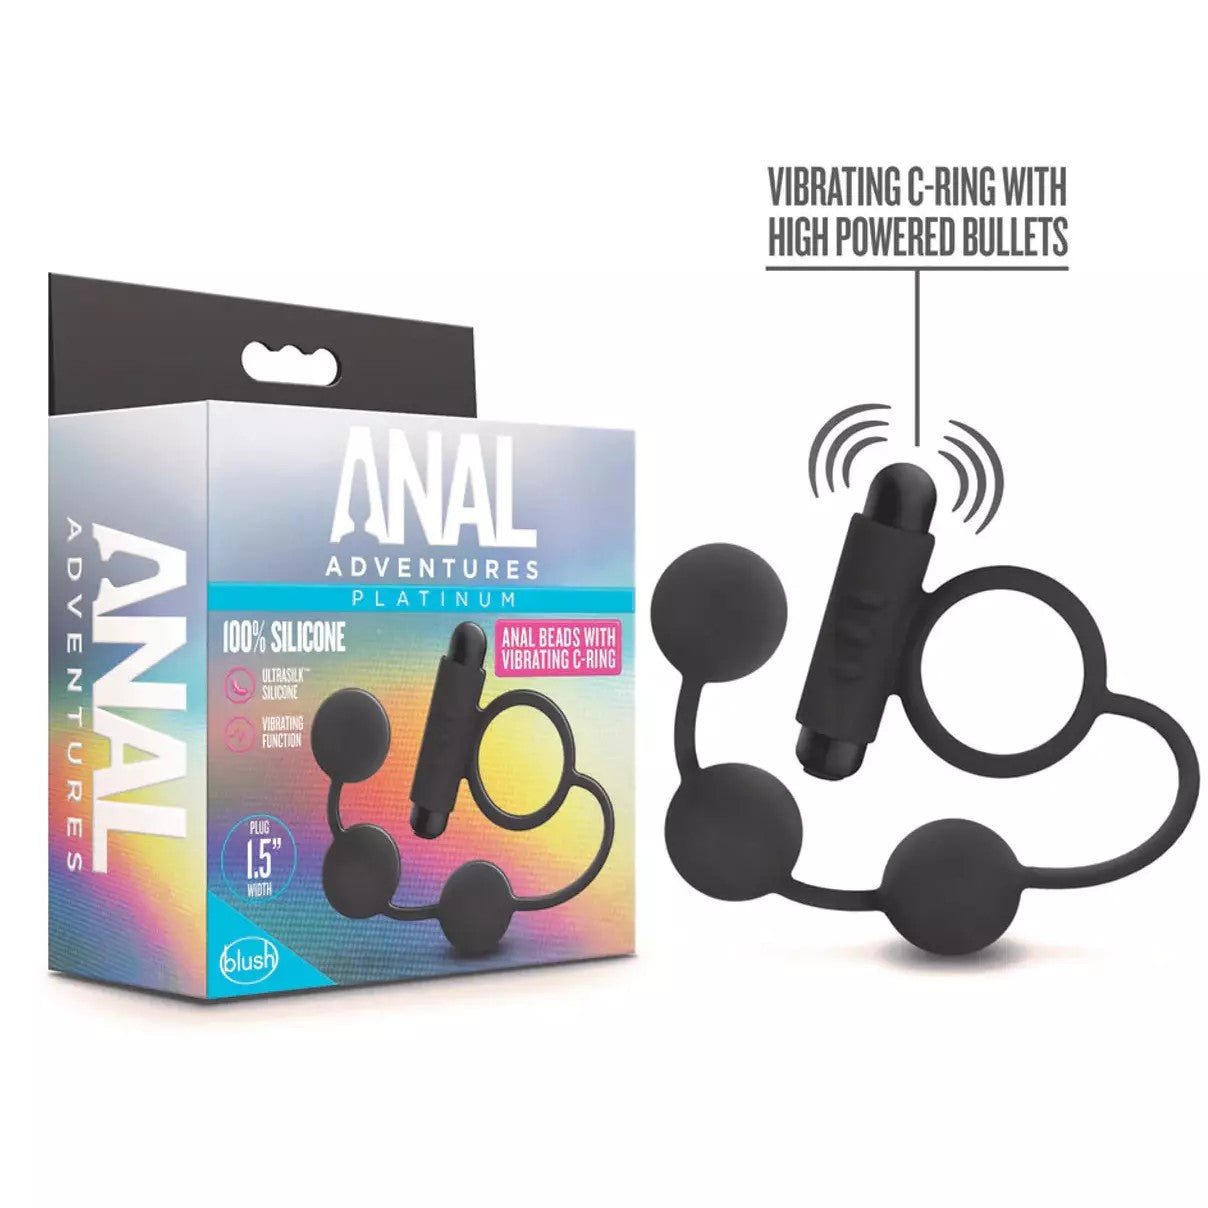 black silicone vibrating cock ring with attached anal beads next to anal adventures box